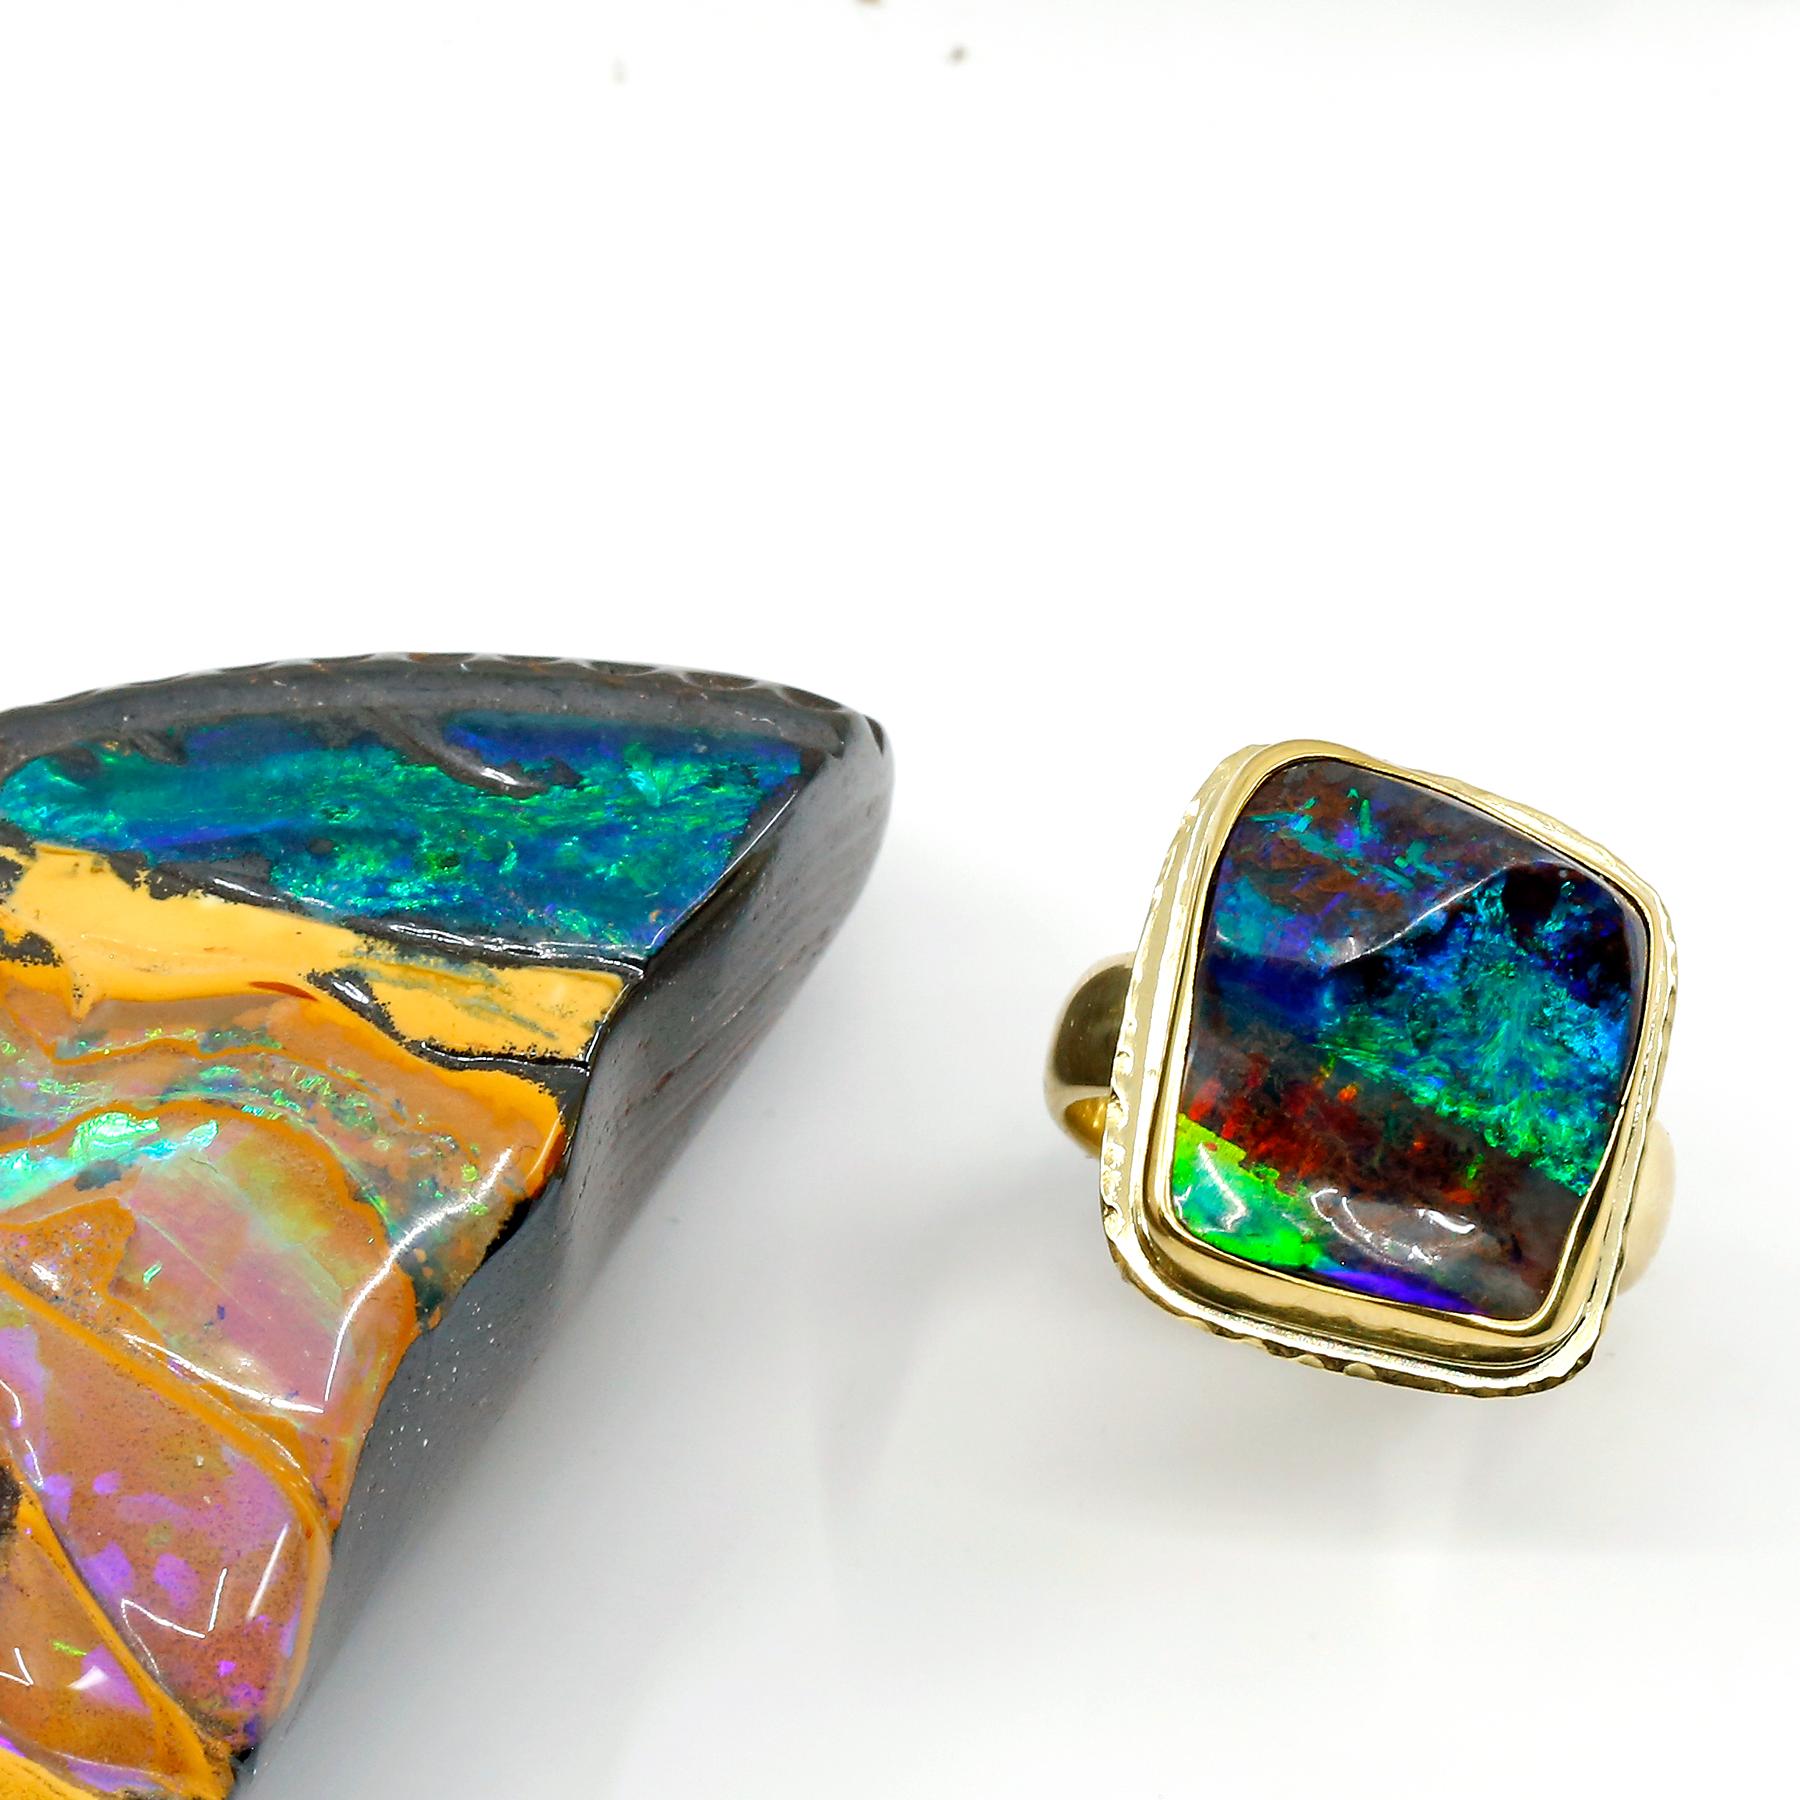 Art jewelry is as unique as its collectors.  This boulder opal not only has the blue, green & red flashes that everyone loves, but it has a unique quality of a pyramid stone.  Meaning, that instead of a flat surface it undulates much like a pyramid.